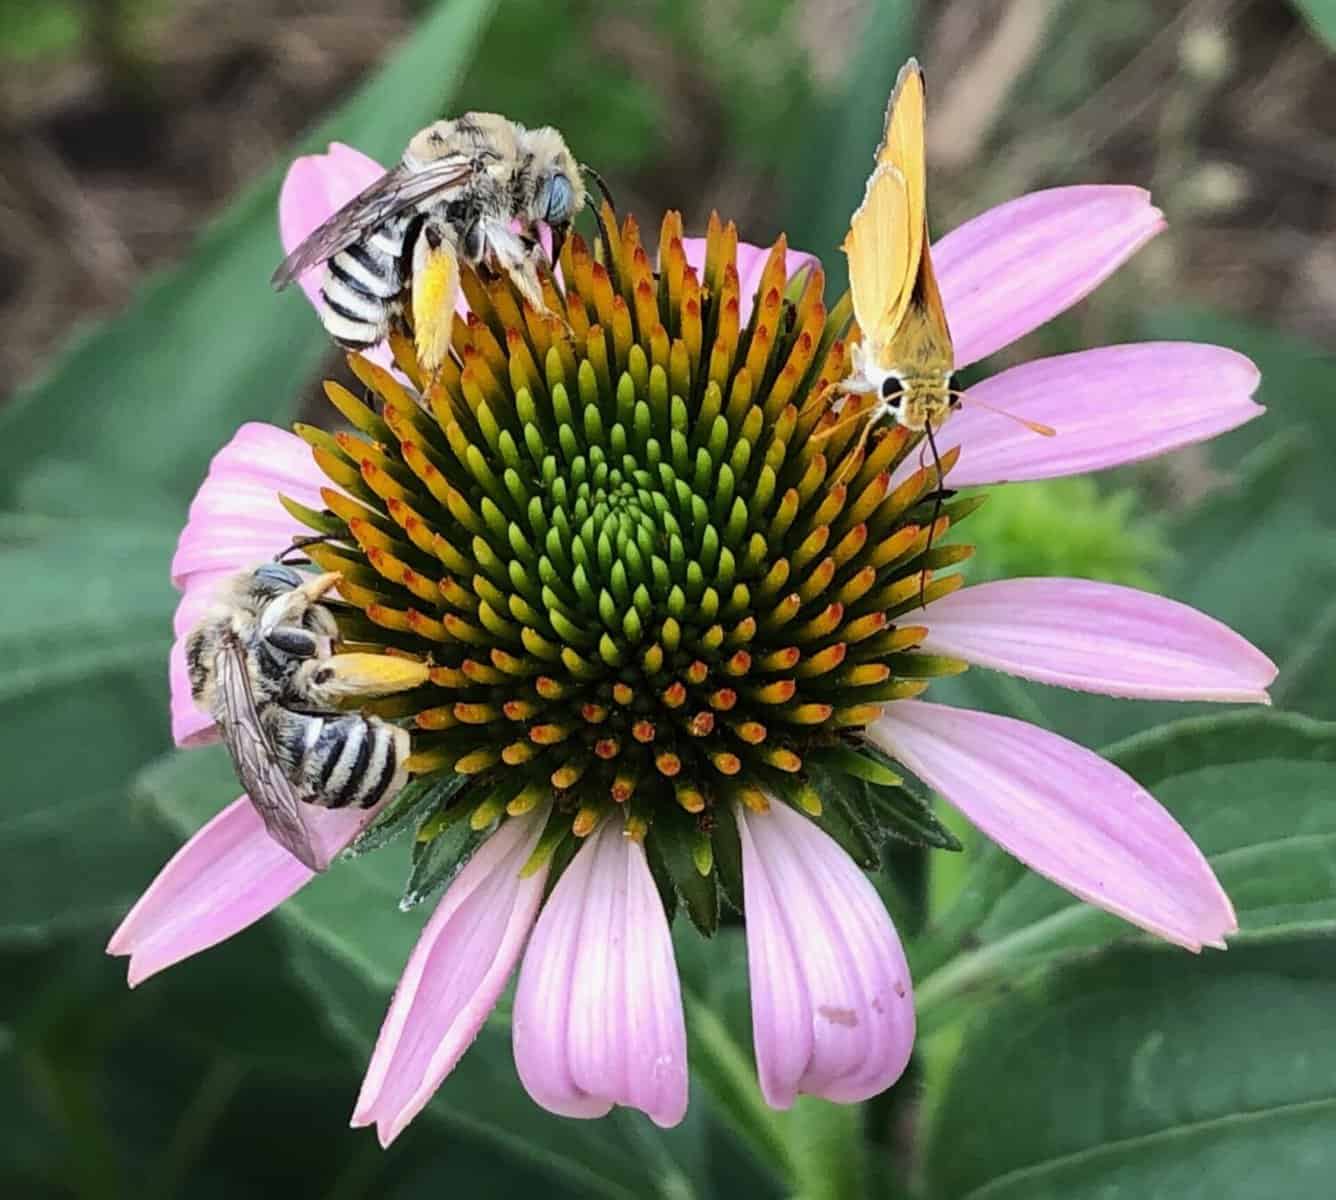 Echinacea flower with 2 bees and a butterfly